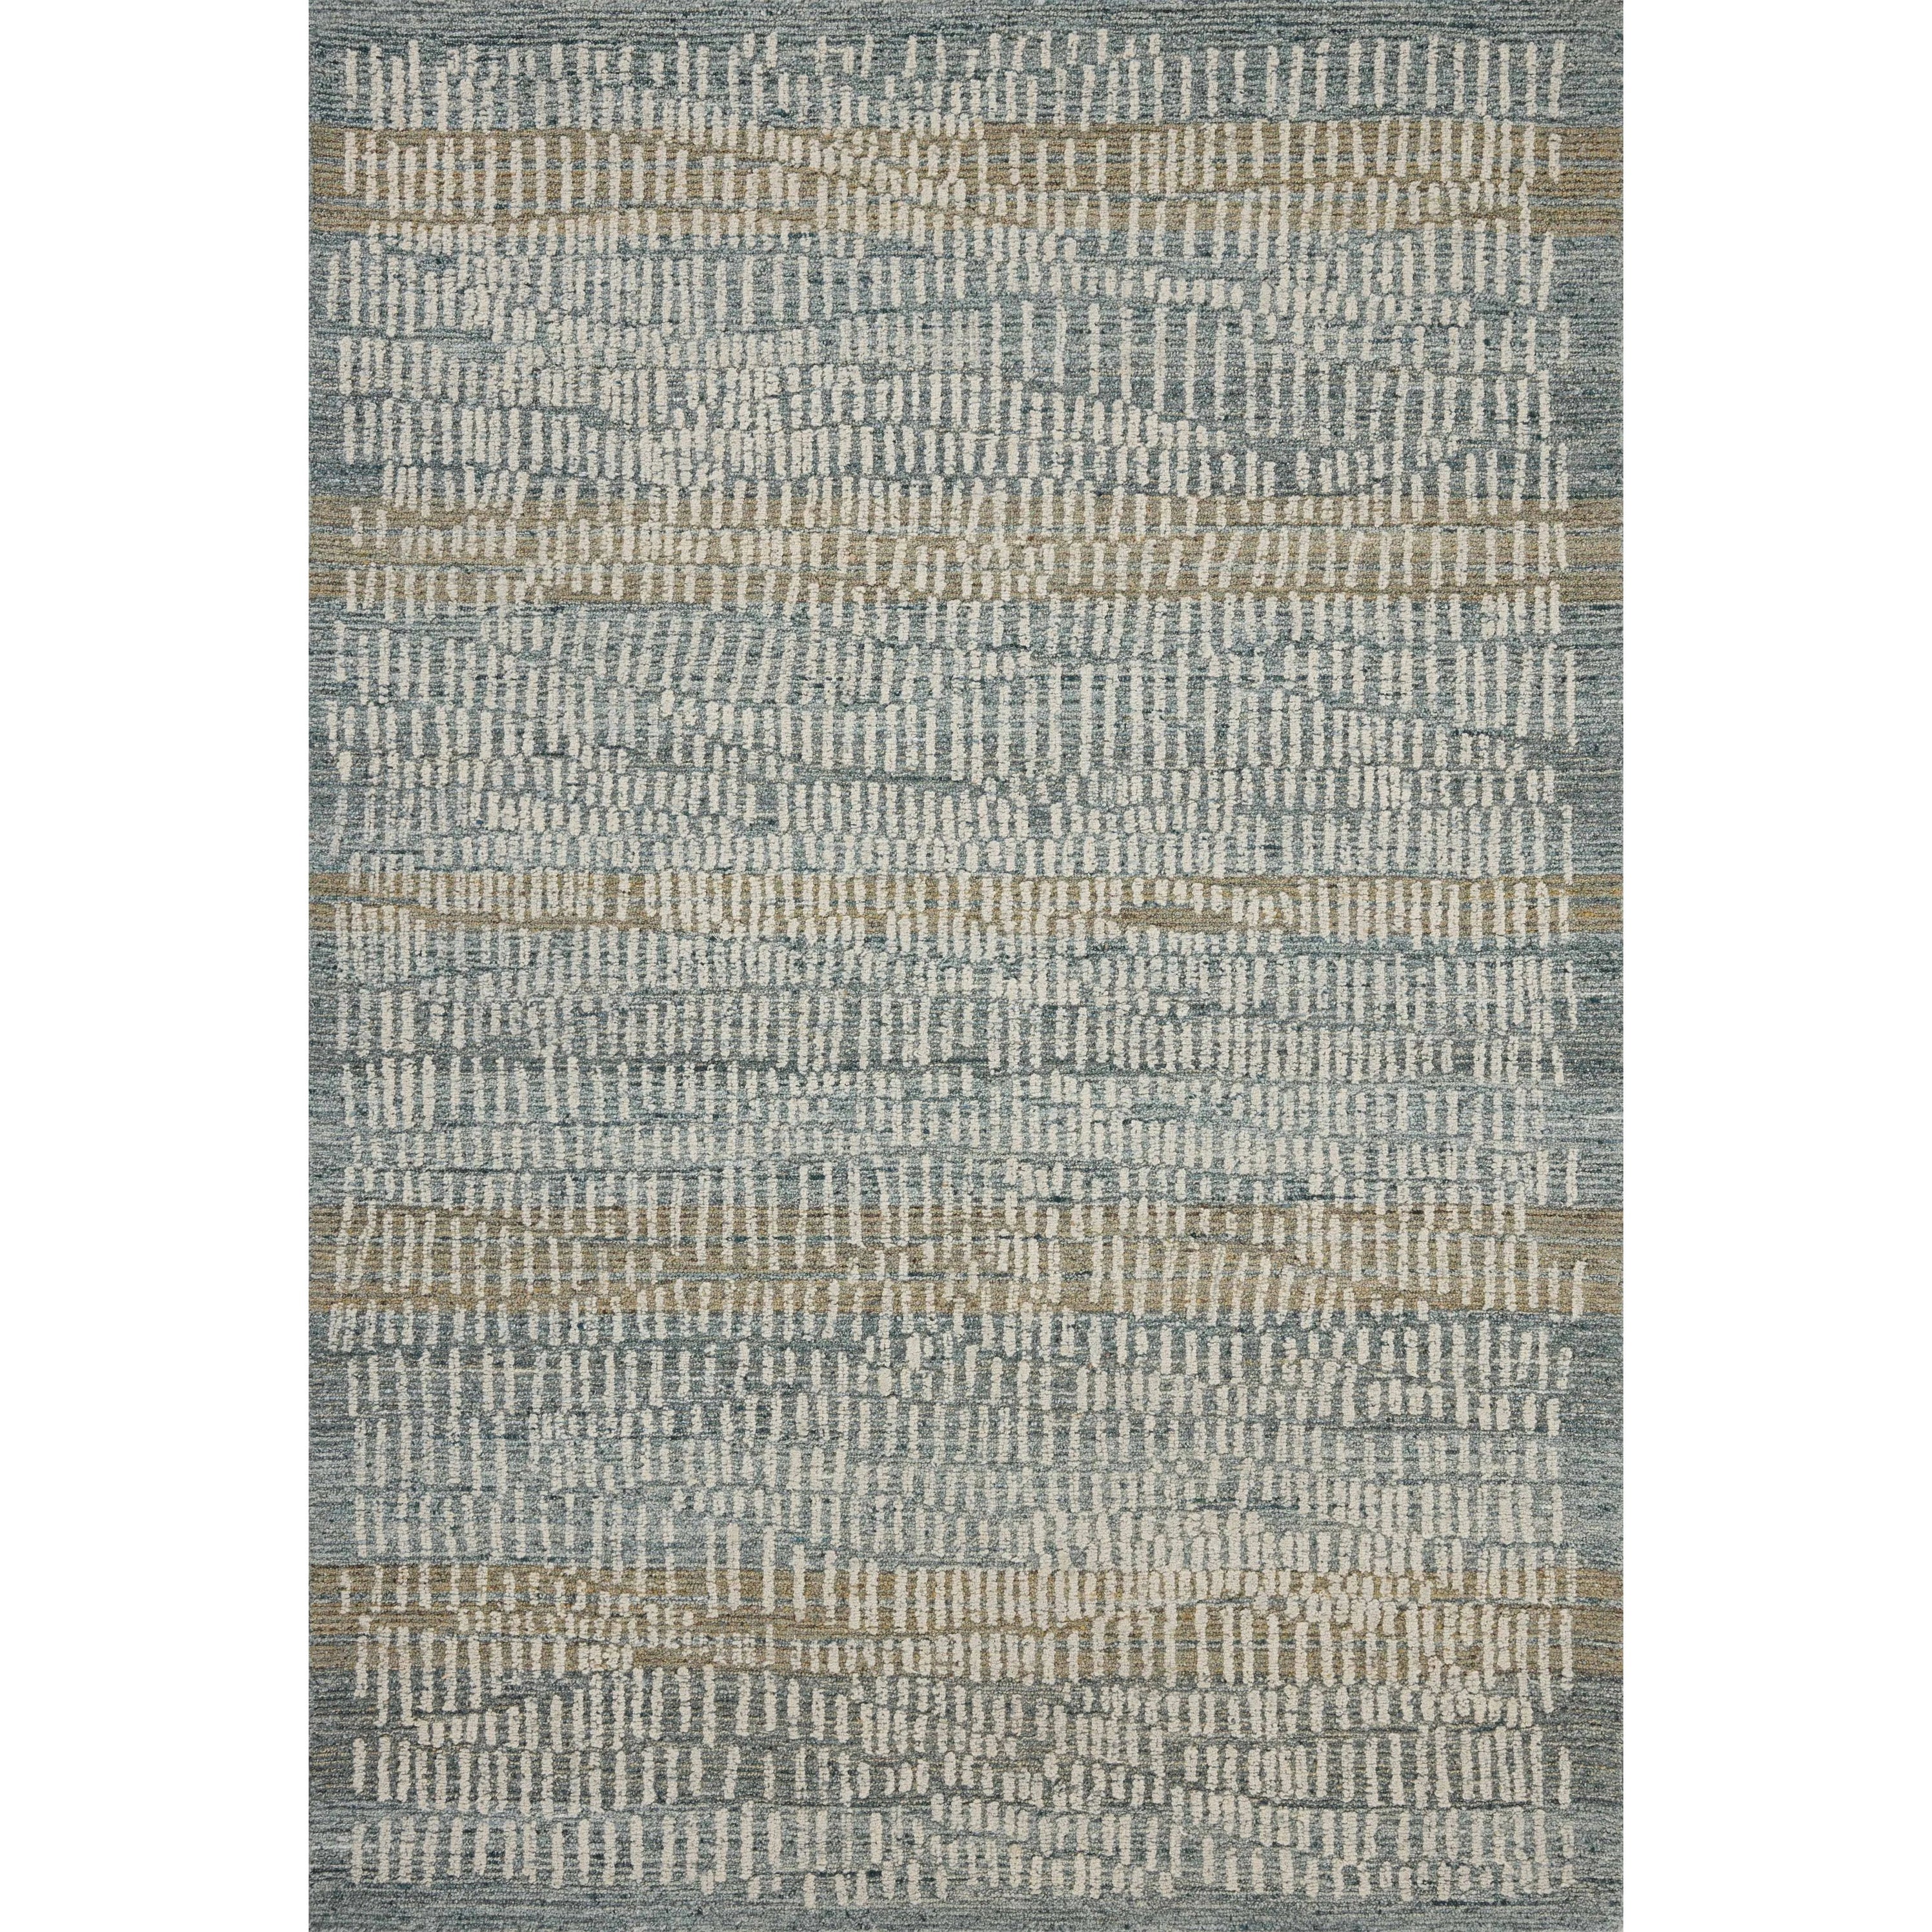 The Elias Ocean / Oatmeal Rug is a hand-tufted wool area rug with lively graphic patterns in earth and stone tones. There’s a unique texture to the rug made by over-tufting, in which a design is hand-tufted over a tufted base, creating a subtle high-low pile. Amethyst Home provides interior design, new home construction design consulting, vintage area rugs, and lighting in the Miami metro area.